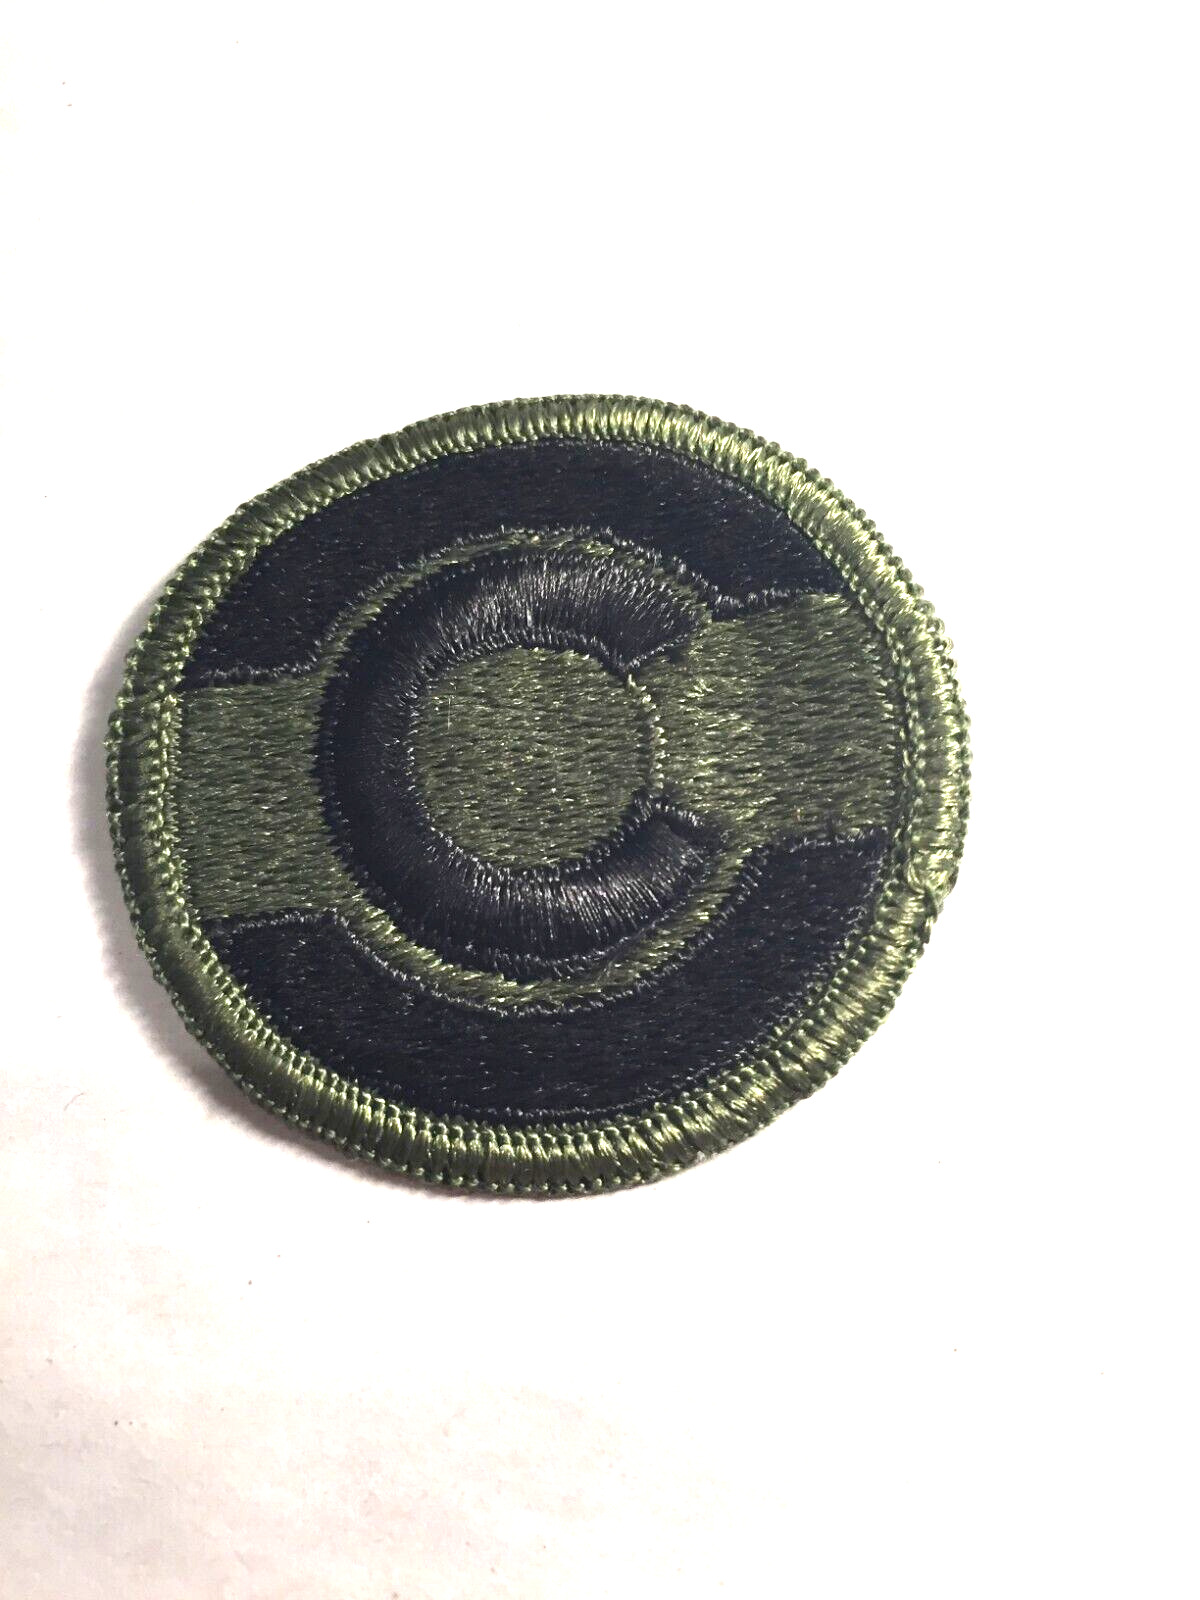 US Army - Colorado National Guard subdued sew on Patch